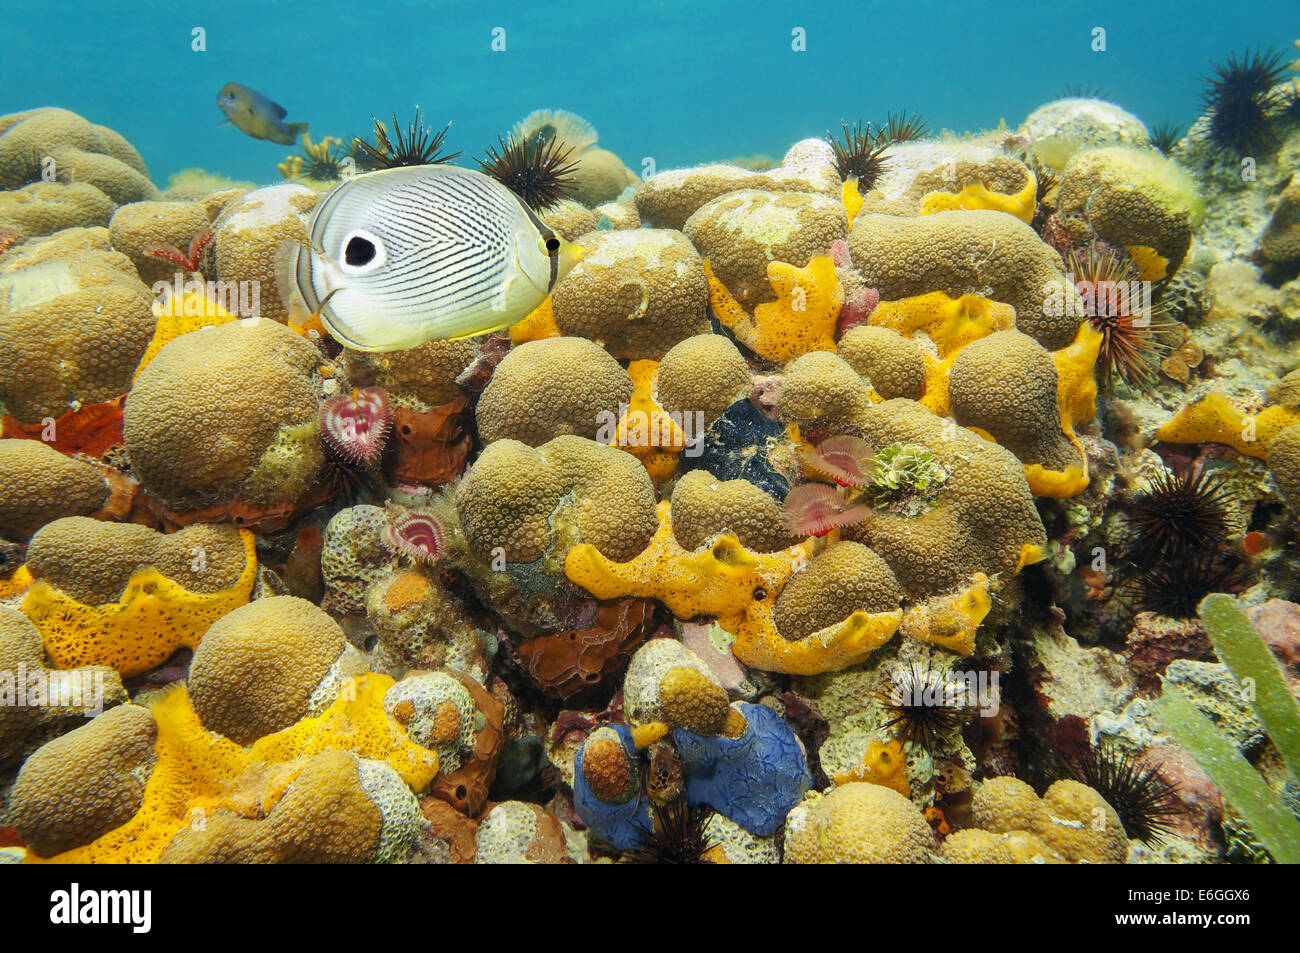 Colorful marine life underwater with coral, sea sponges, fan worms, urchins and a foureye butterflyfish, Caribbean Stock Photo